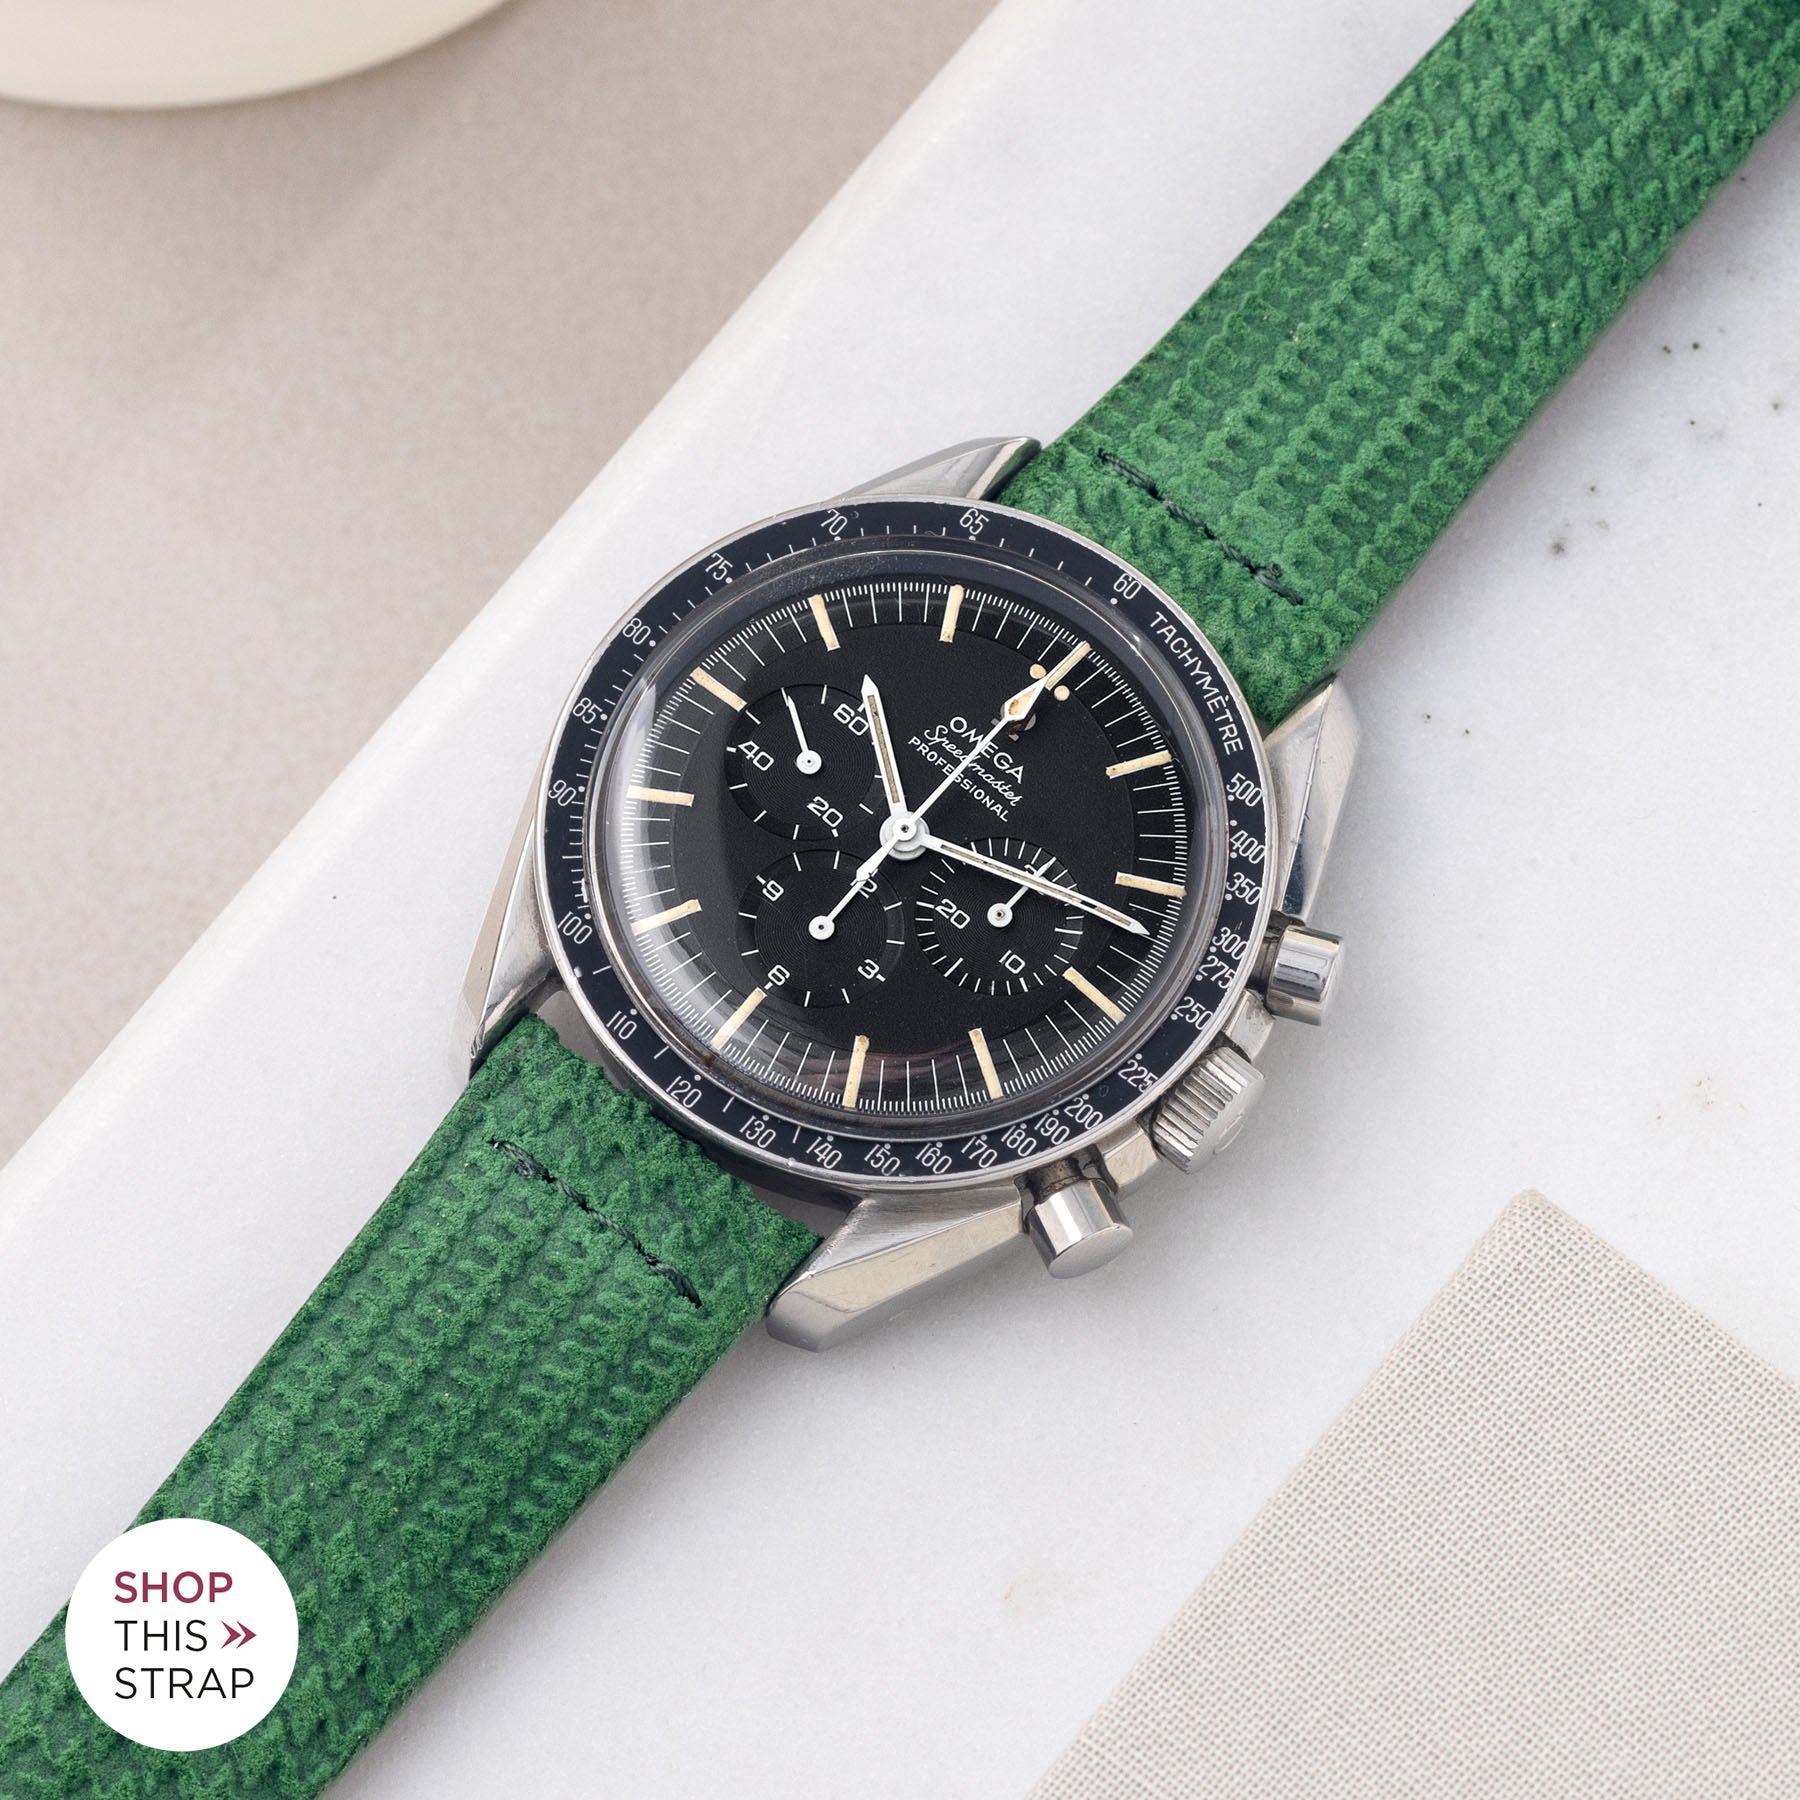 Bulang and Sons_Strapguide_Omega Speedmaster Professional_Ziggy Green Suede Leather Watch Strap